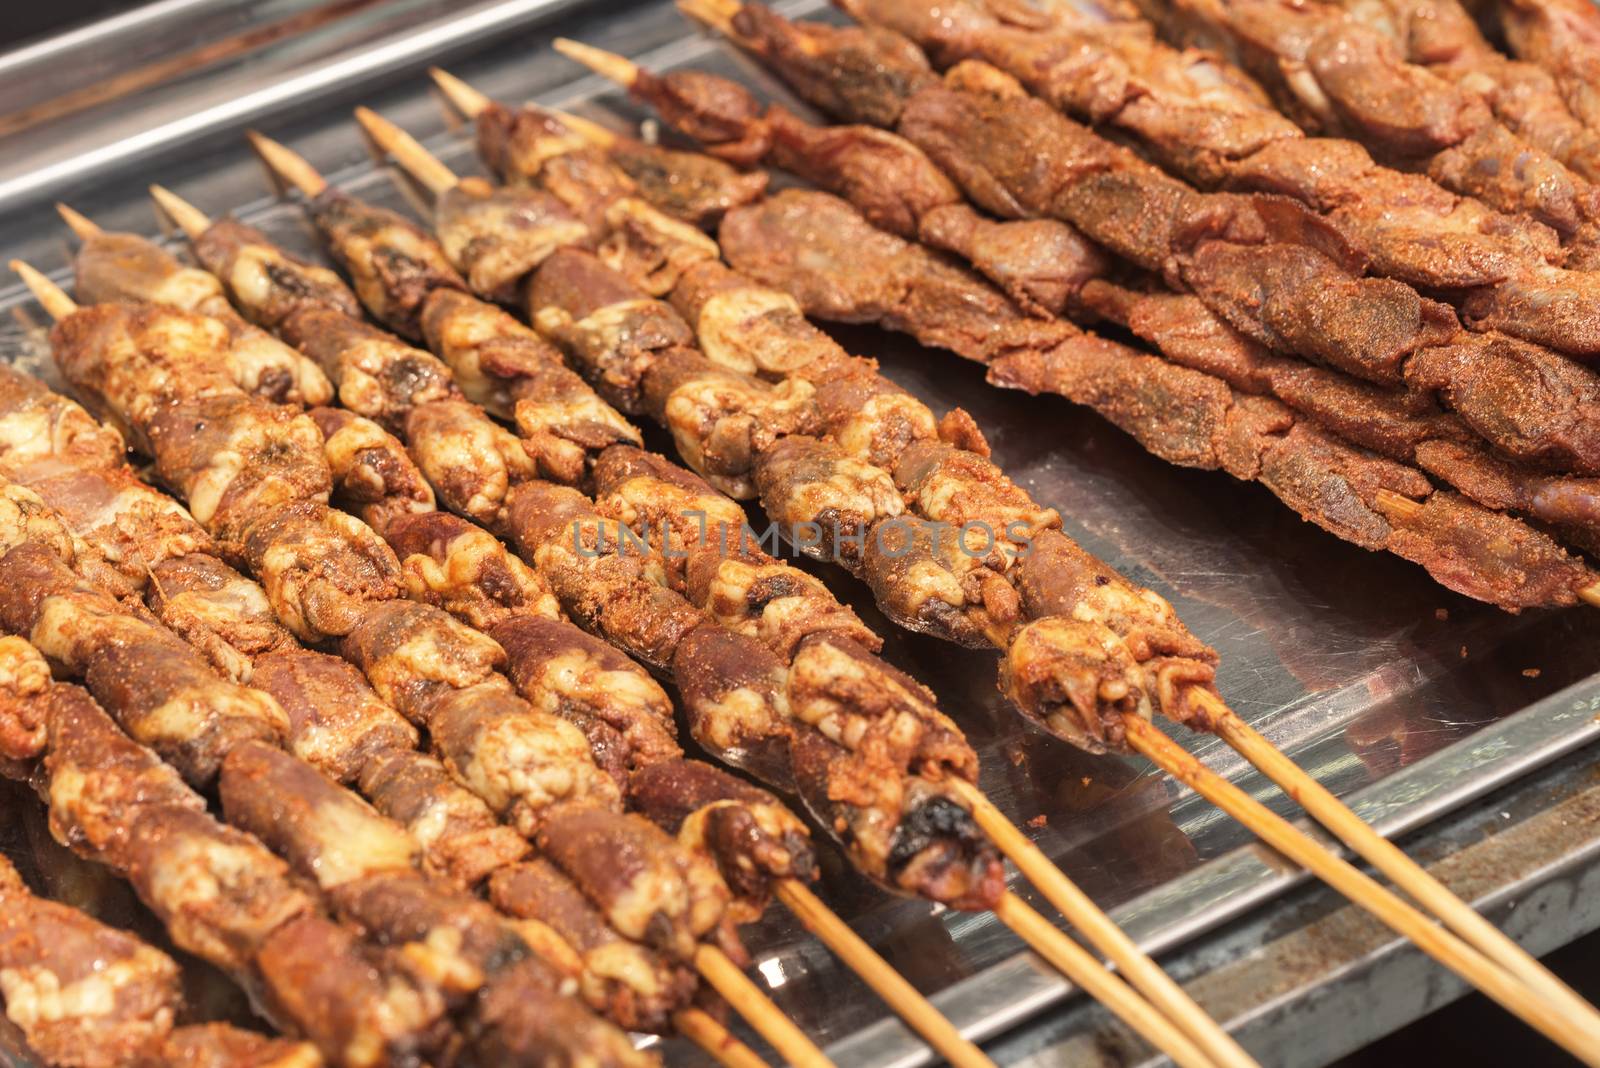 Street food asia. Meat on a stick.